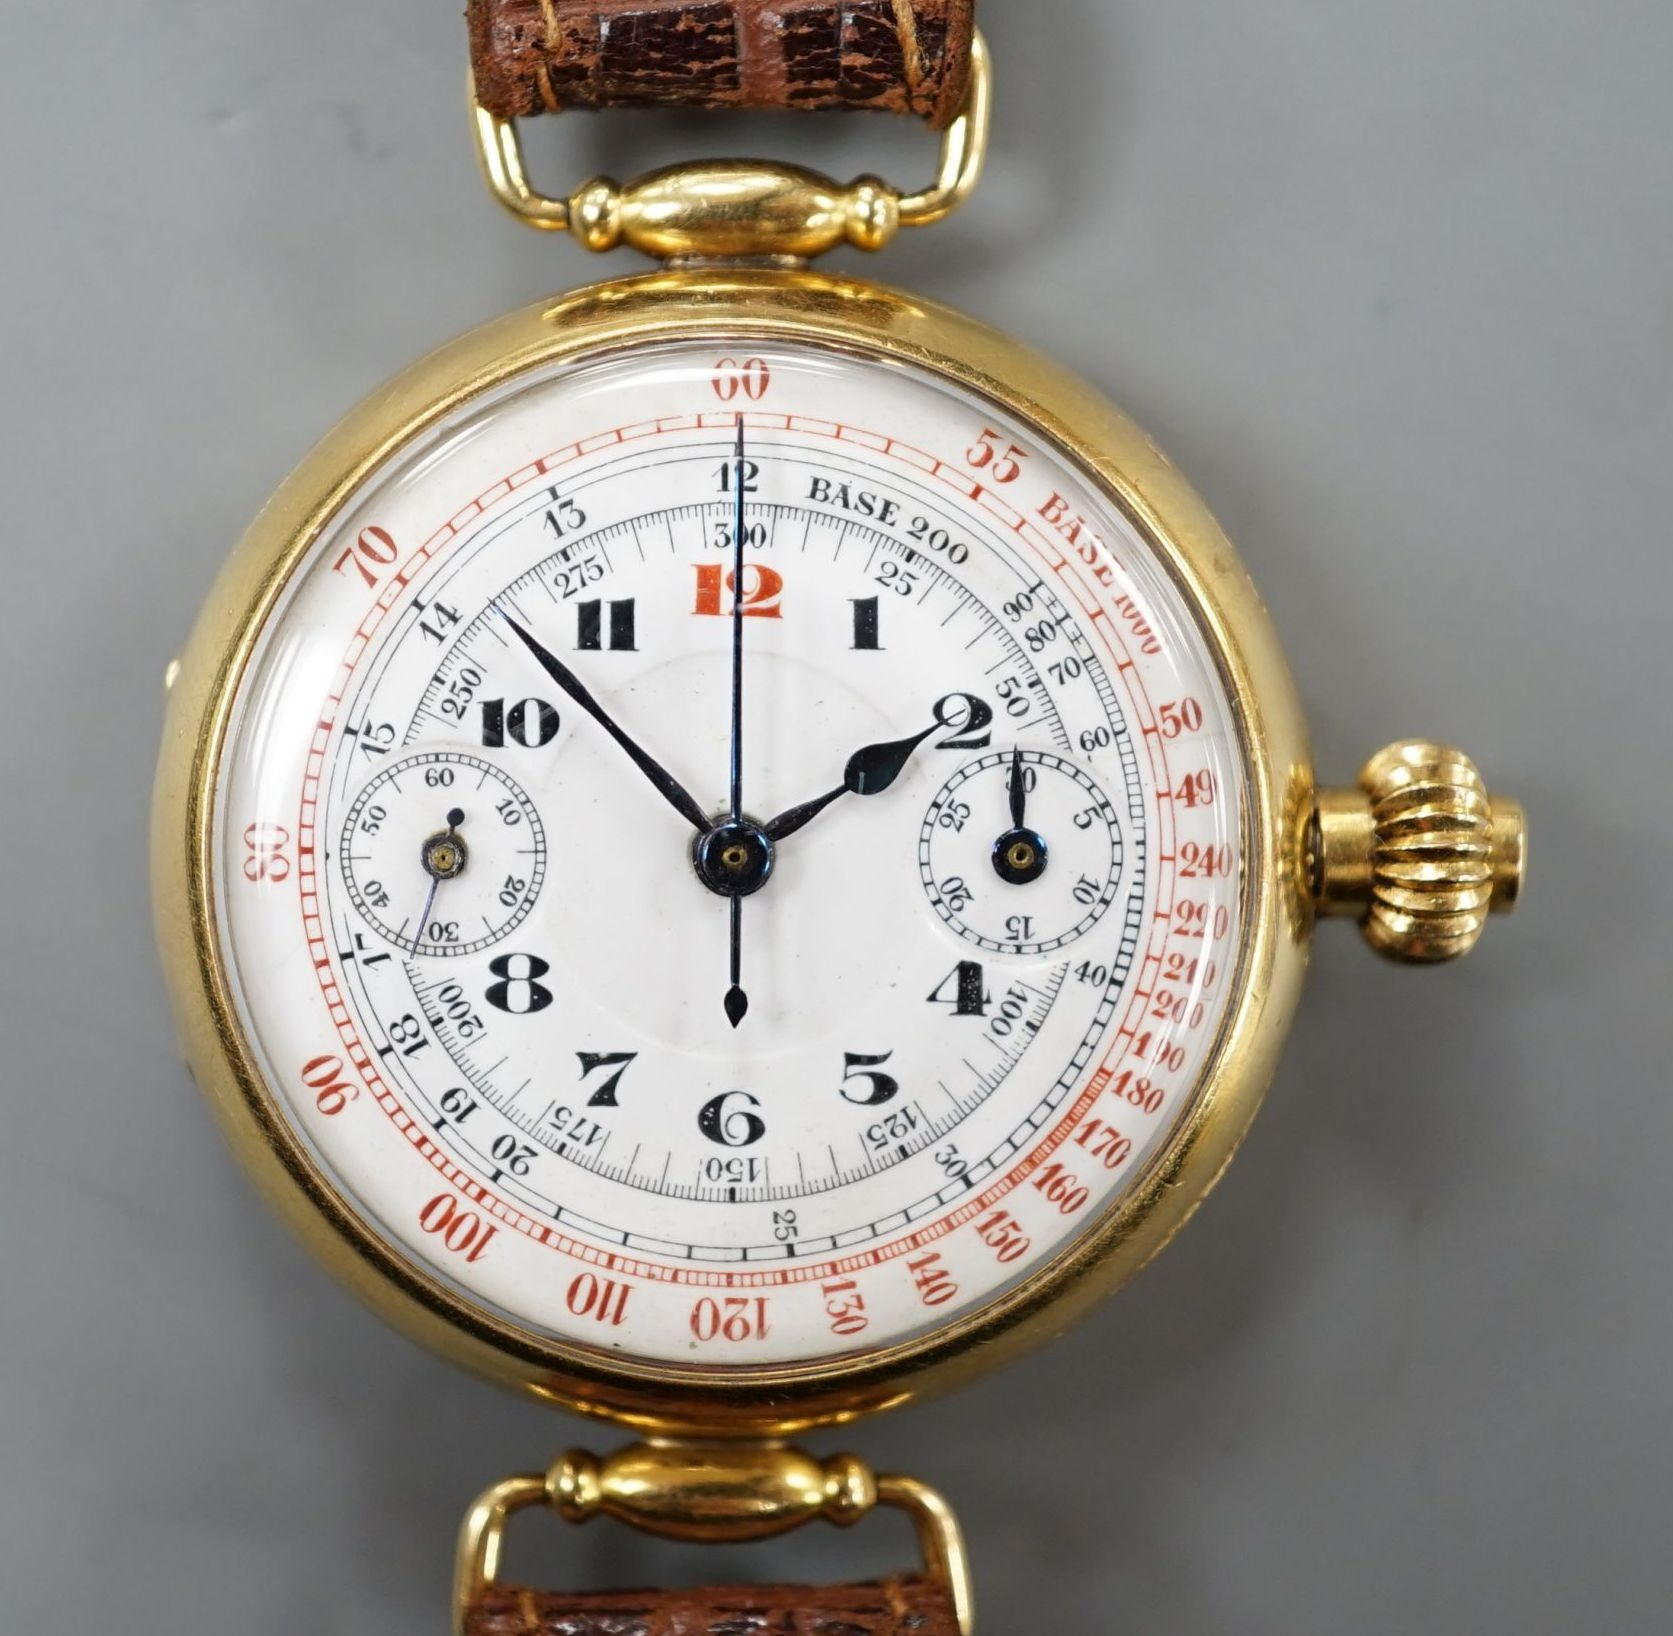 A gentleman's early 20th century 18k single button chronograph manual wind wrist watch, with enamelled Arabic dial and two subsidiary dials, with swivel lugs, on a later strap